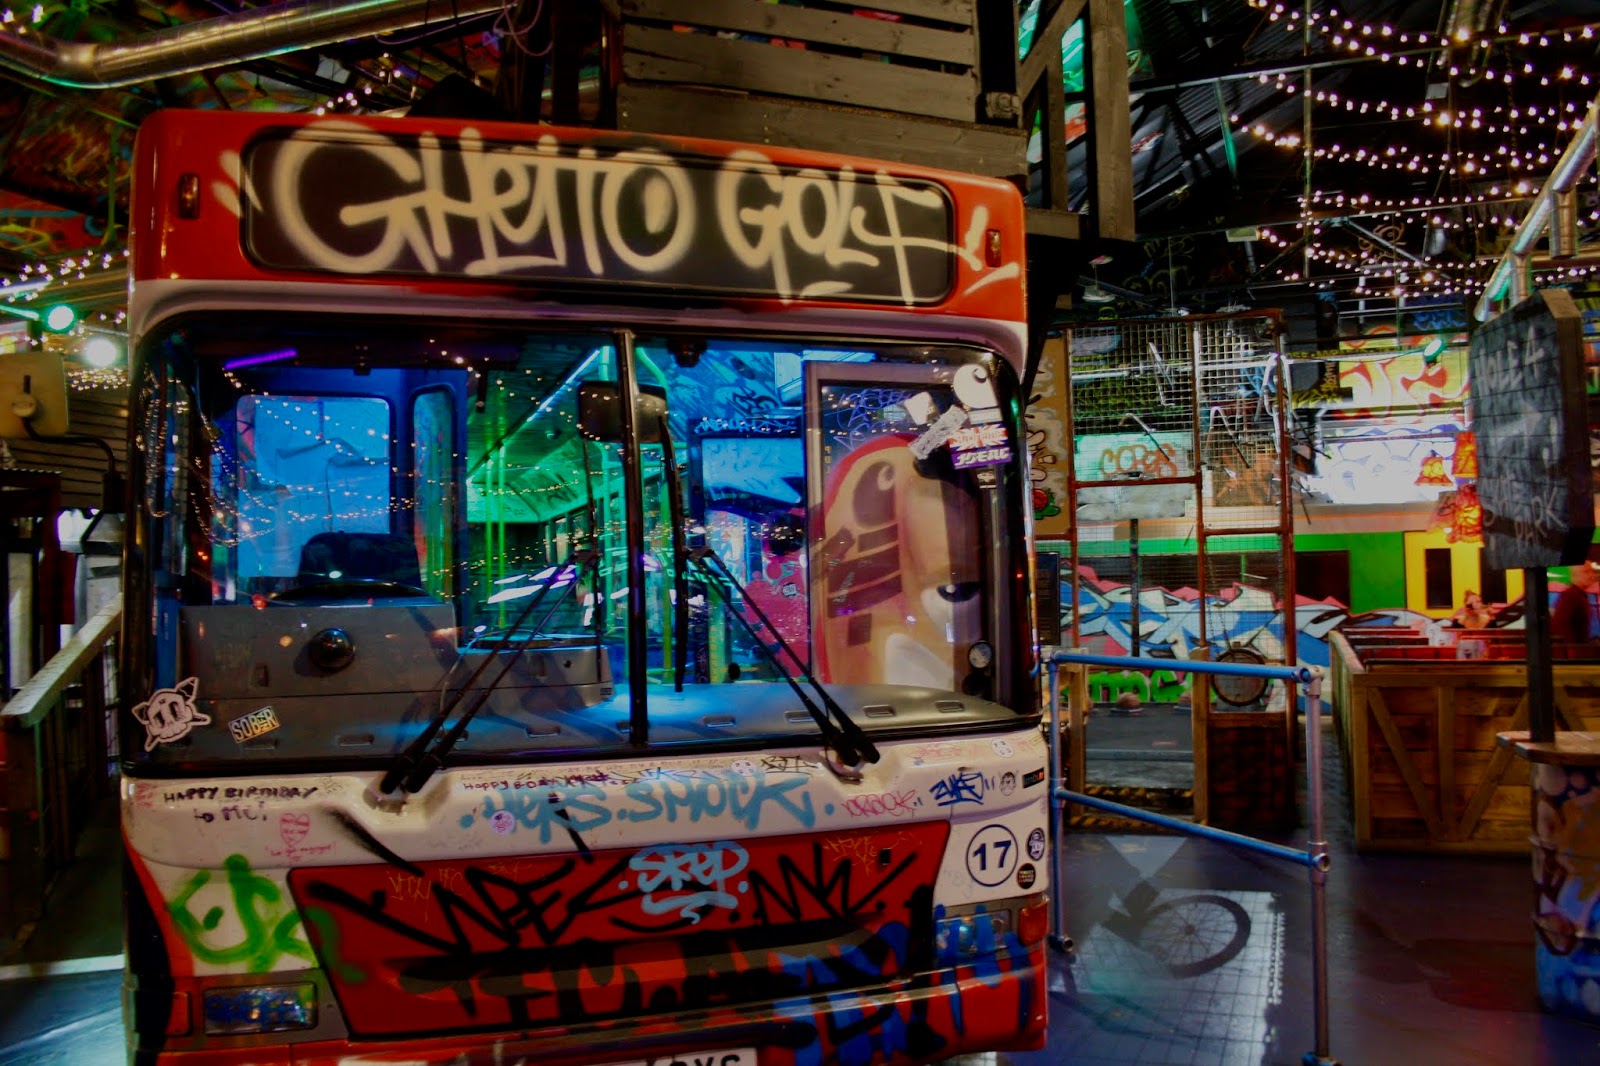 the highlight of a visit to Ghetto Golf, a real bus with a mini golf hole inside